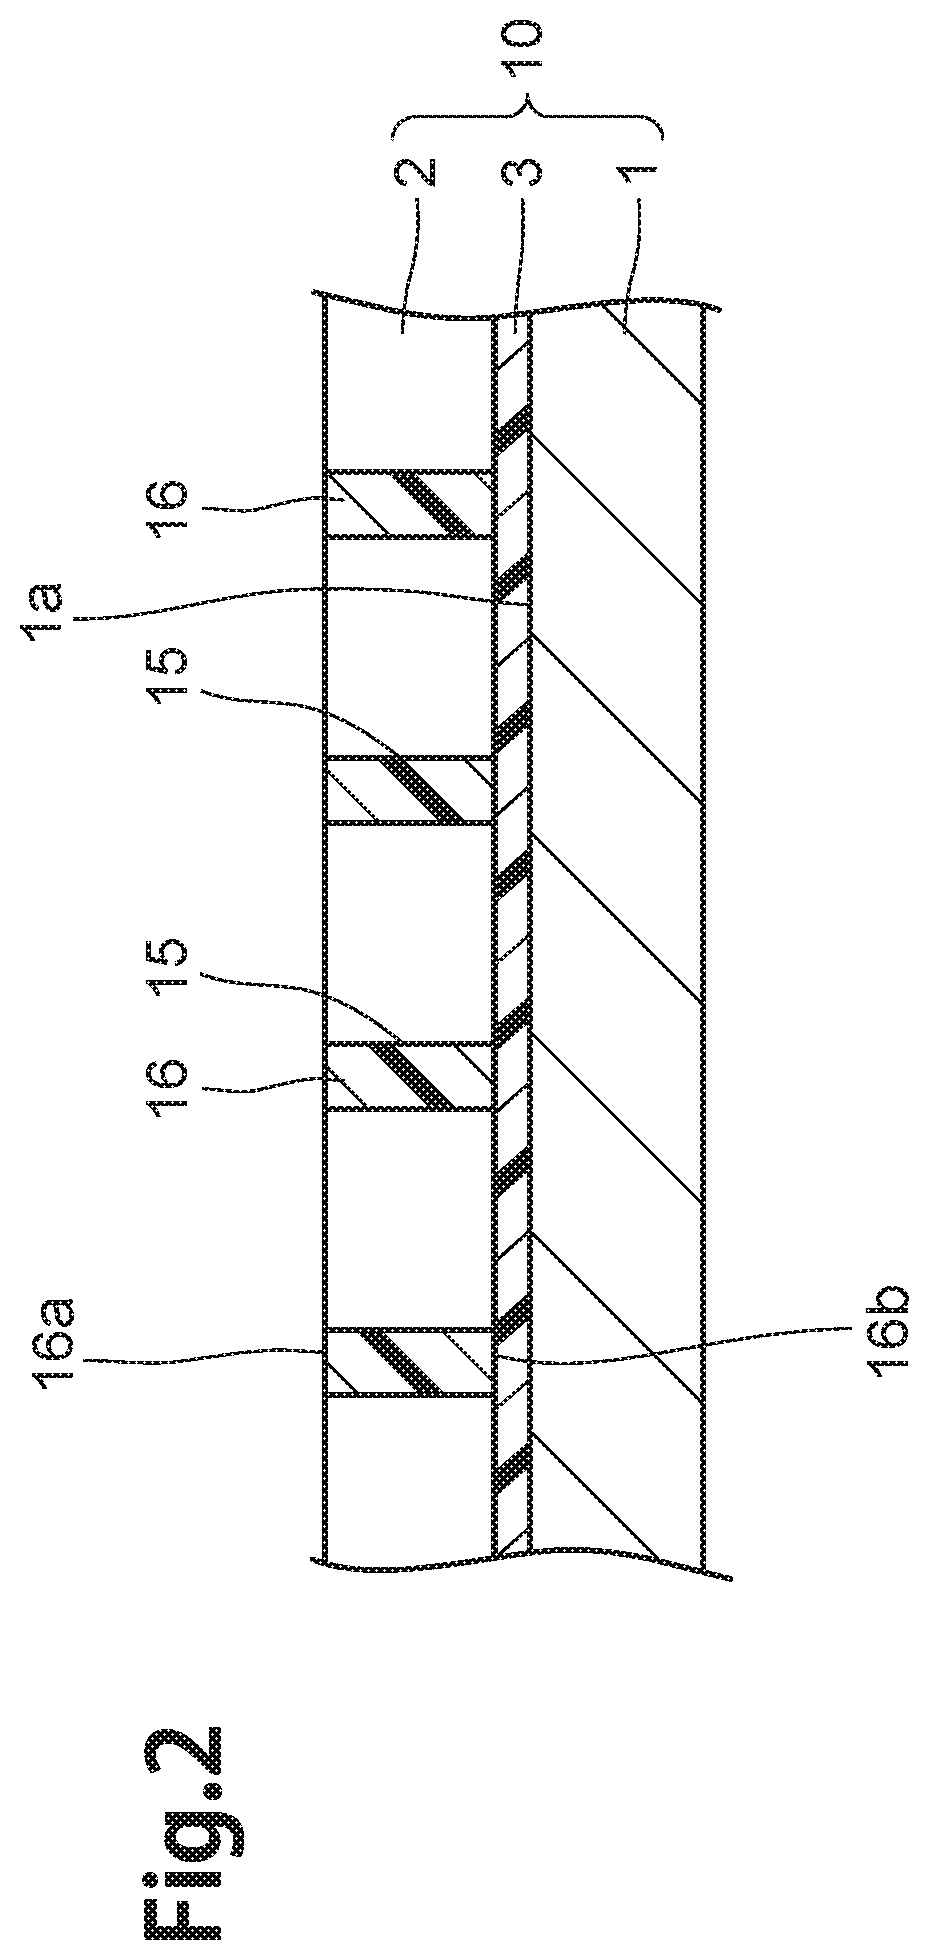 Thin-Film Filter, Thin-Film Filter Substrate, Method of Manufacturing the Thin-Film Filter, Method of Manufacturing the Thin-Film Filter Substrate, MEMS Microphone and Method of Manufacturing the MEMS Microphone